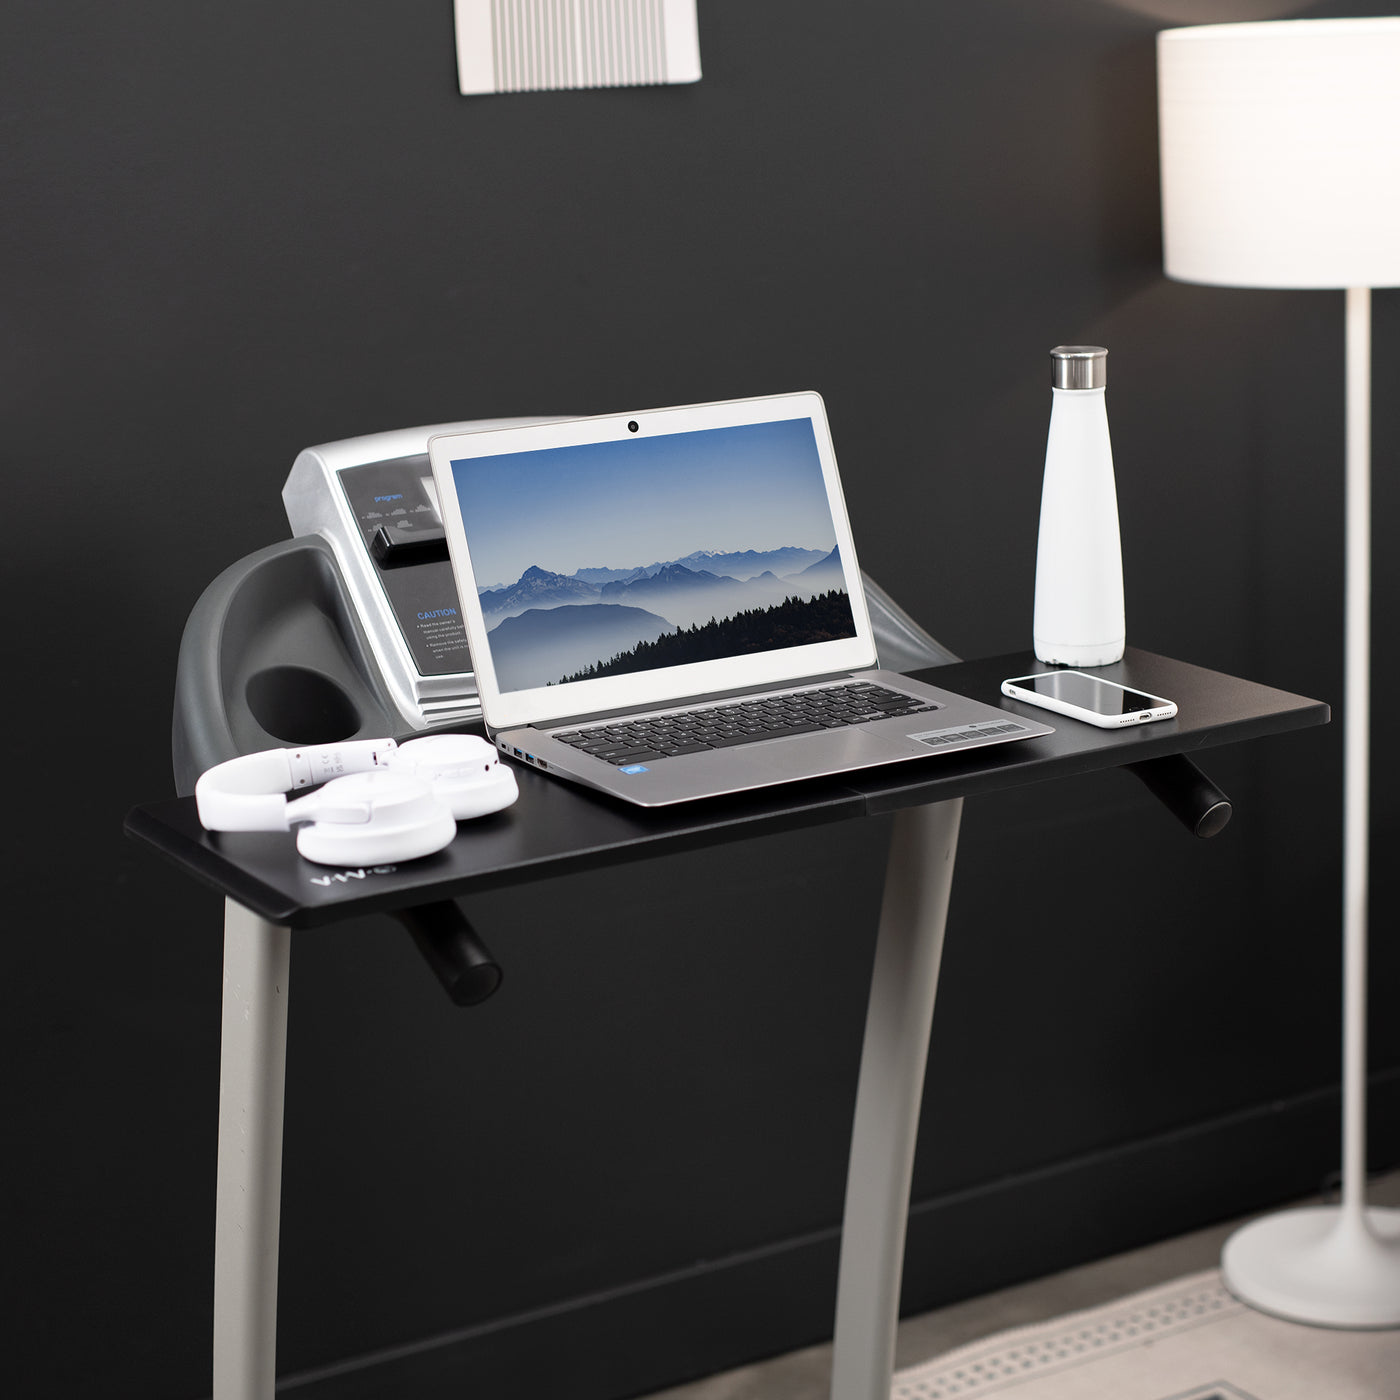 This innovative design, fitting most treadmills on the market, allows you to get your work done while walking, making it possible to study, do homework, research, shop, and more while on the move.